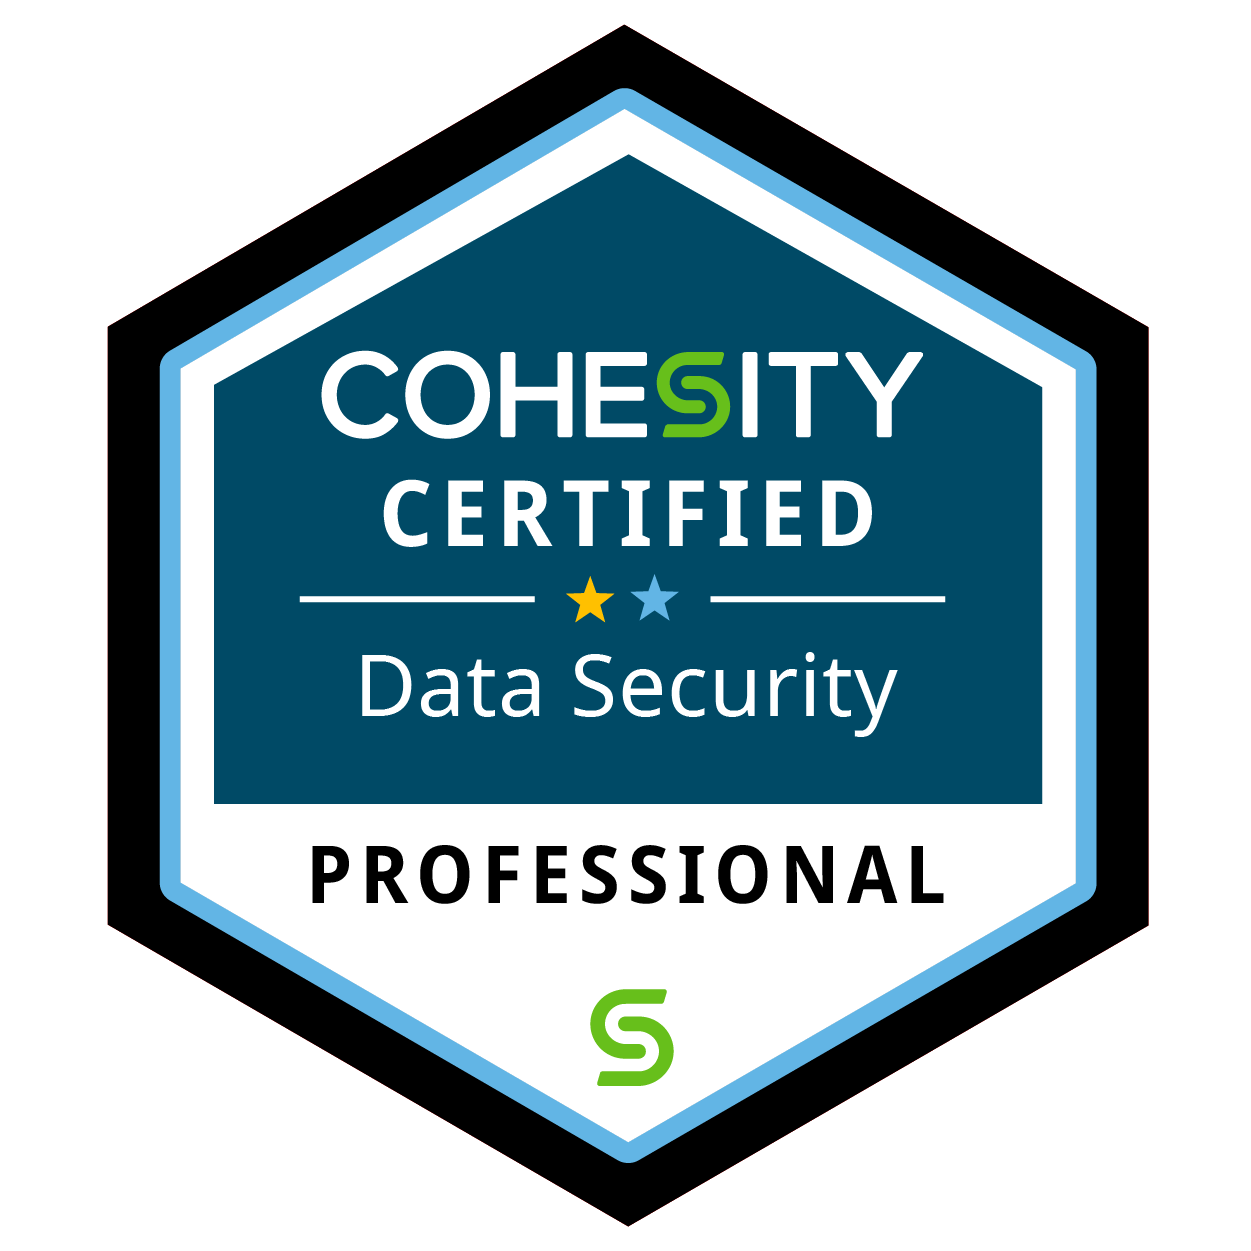 Cohesity Data Security Professional Certification Badge